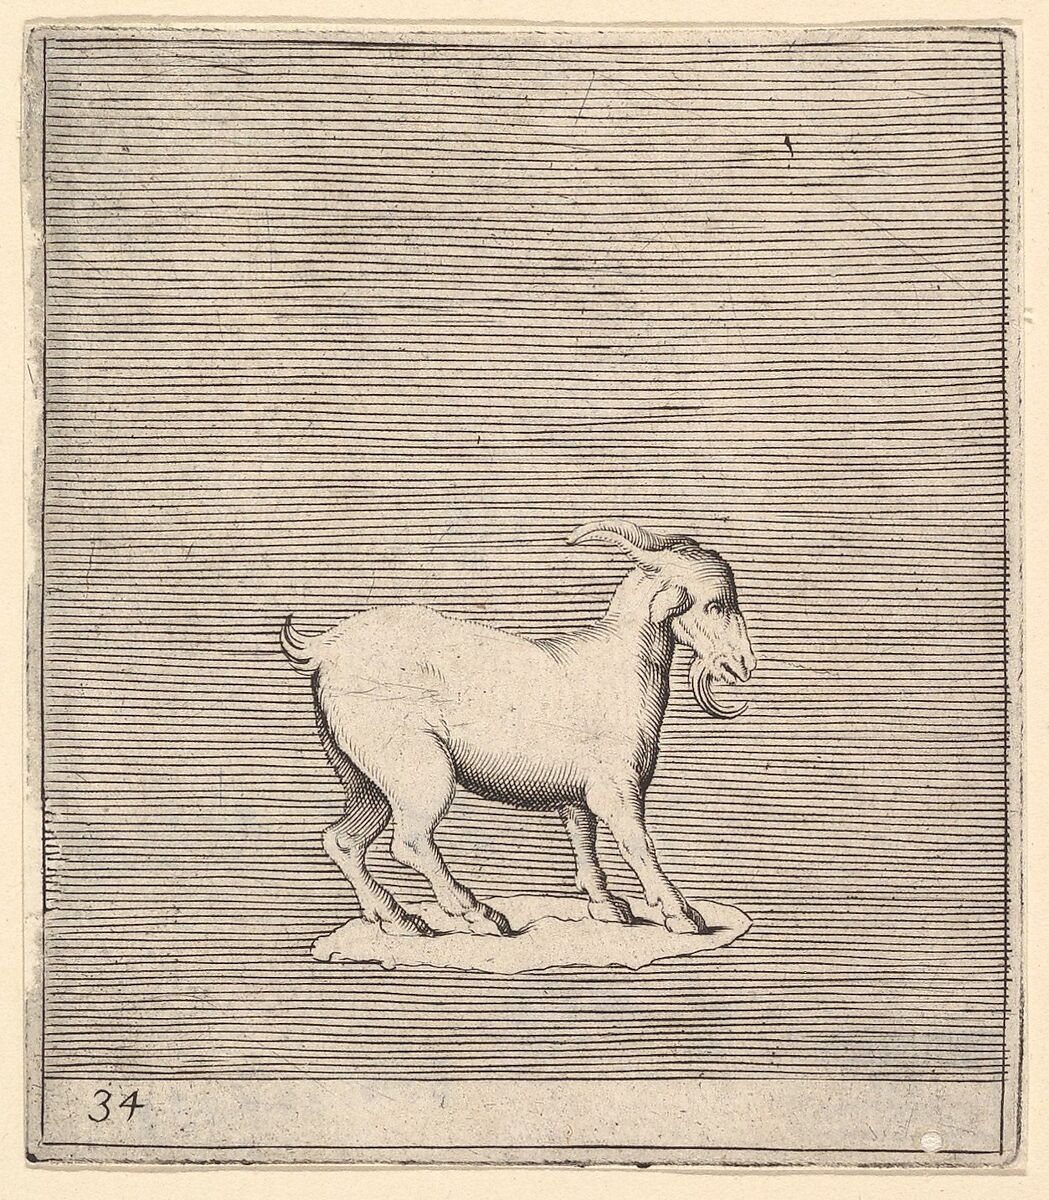 Ram, from "Ex Antiquis Cameorum et Gemmae Delineata", Anonymous, Italian, 16th century, Engraving; third state 